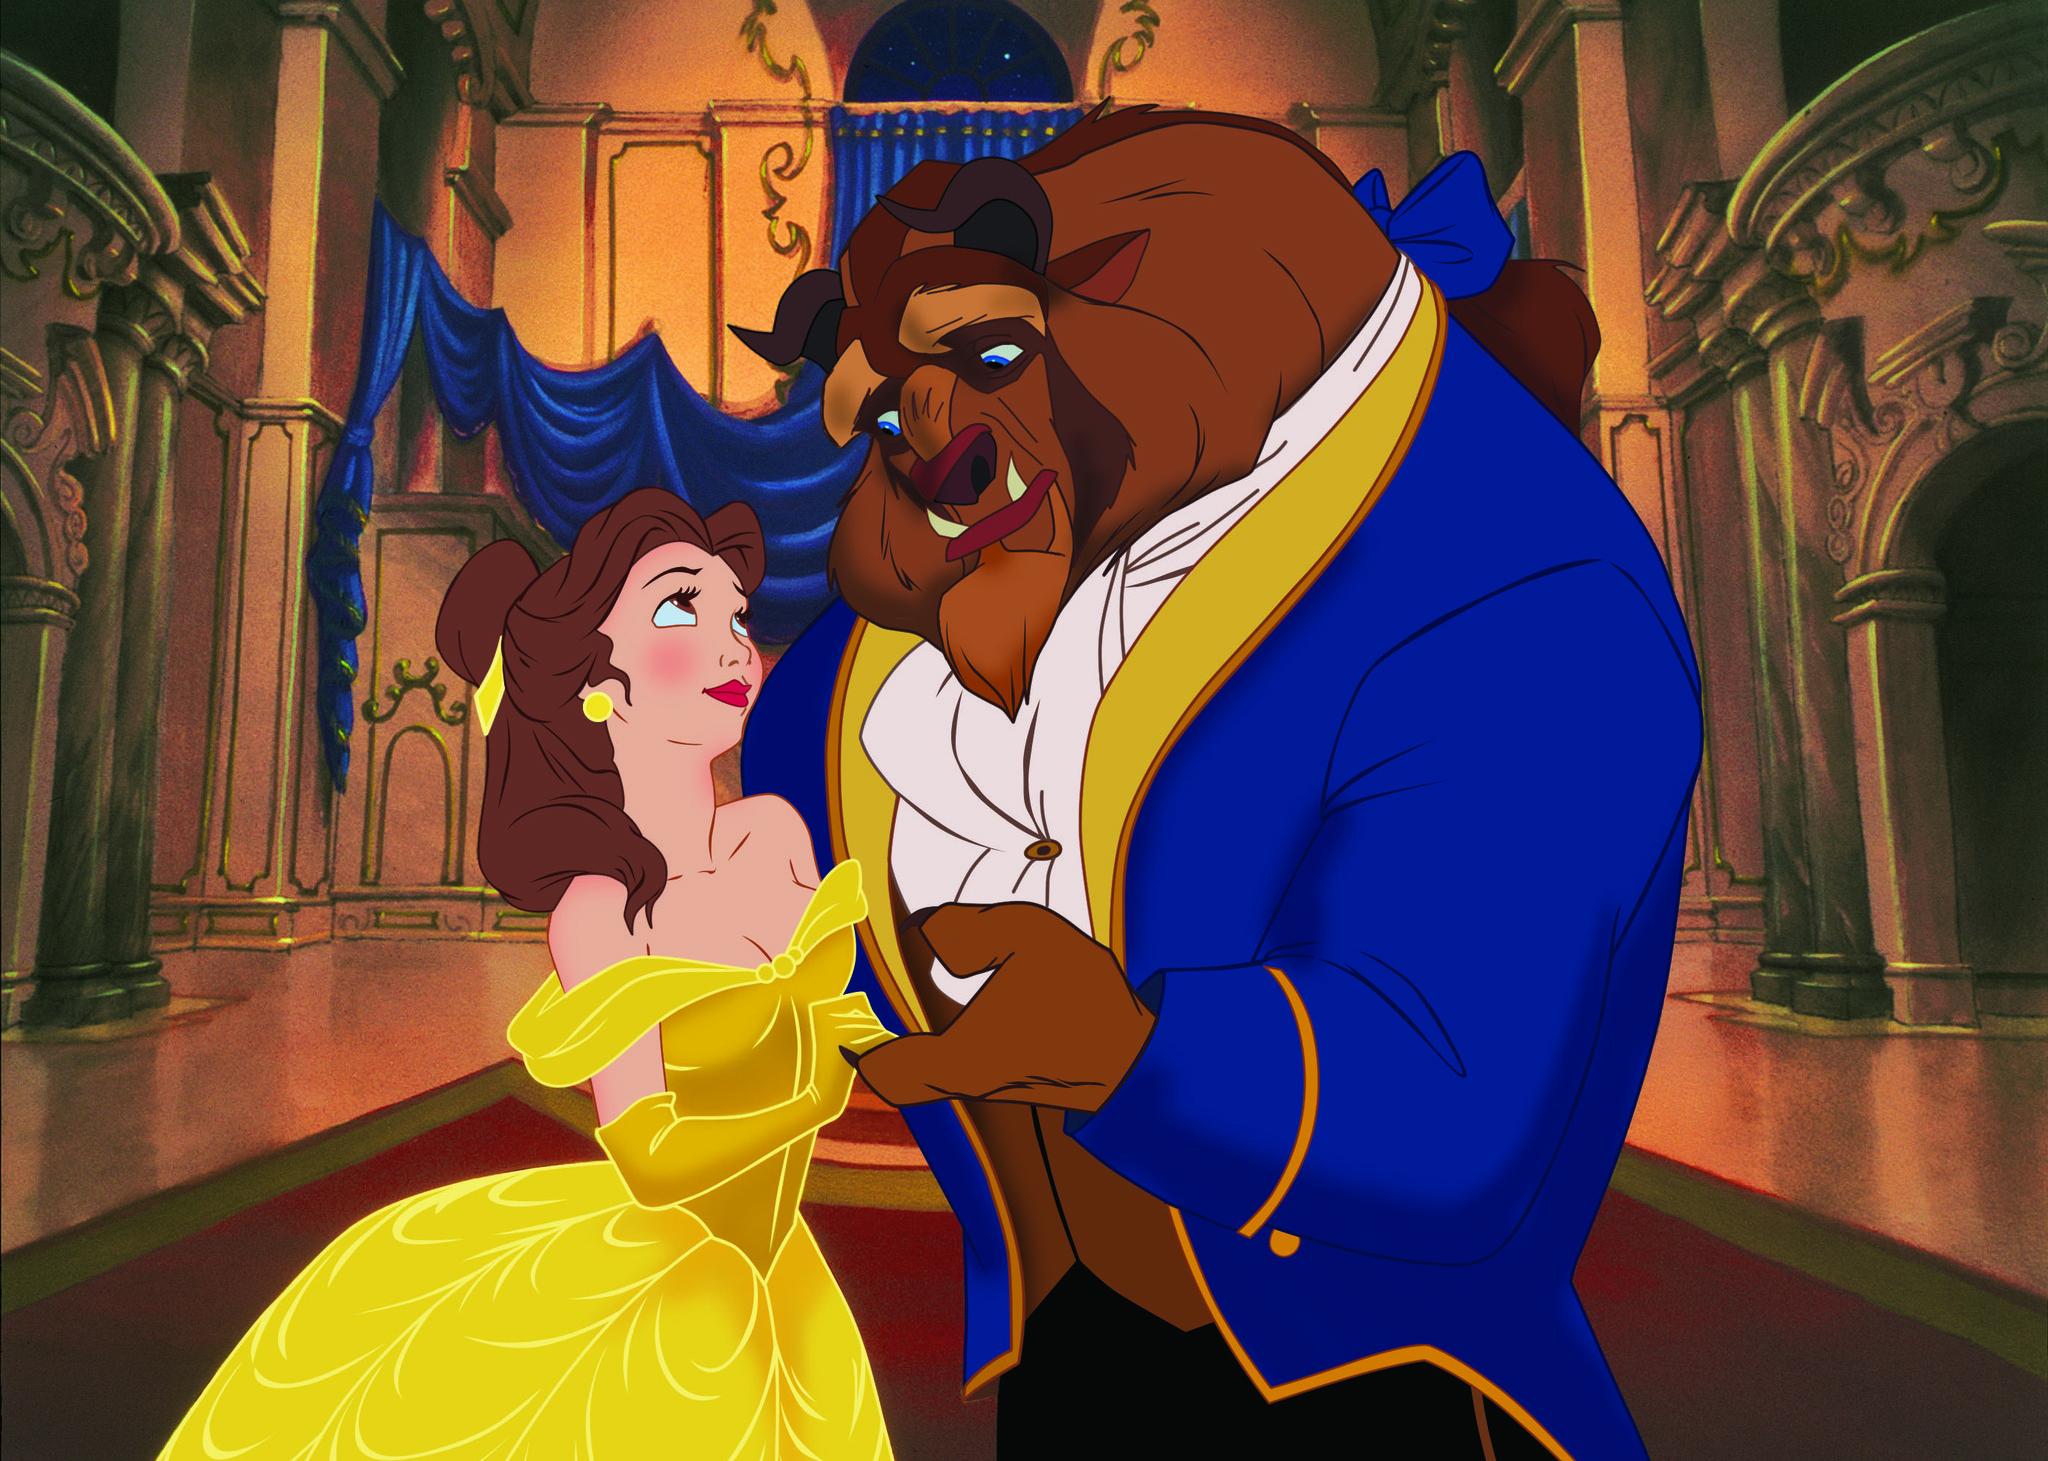 A cartoon of Belle in a yellow ball gown dancing with the Beast in a blue suit.